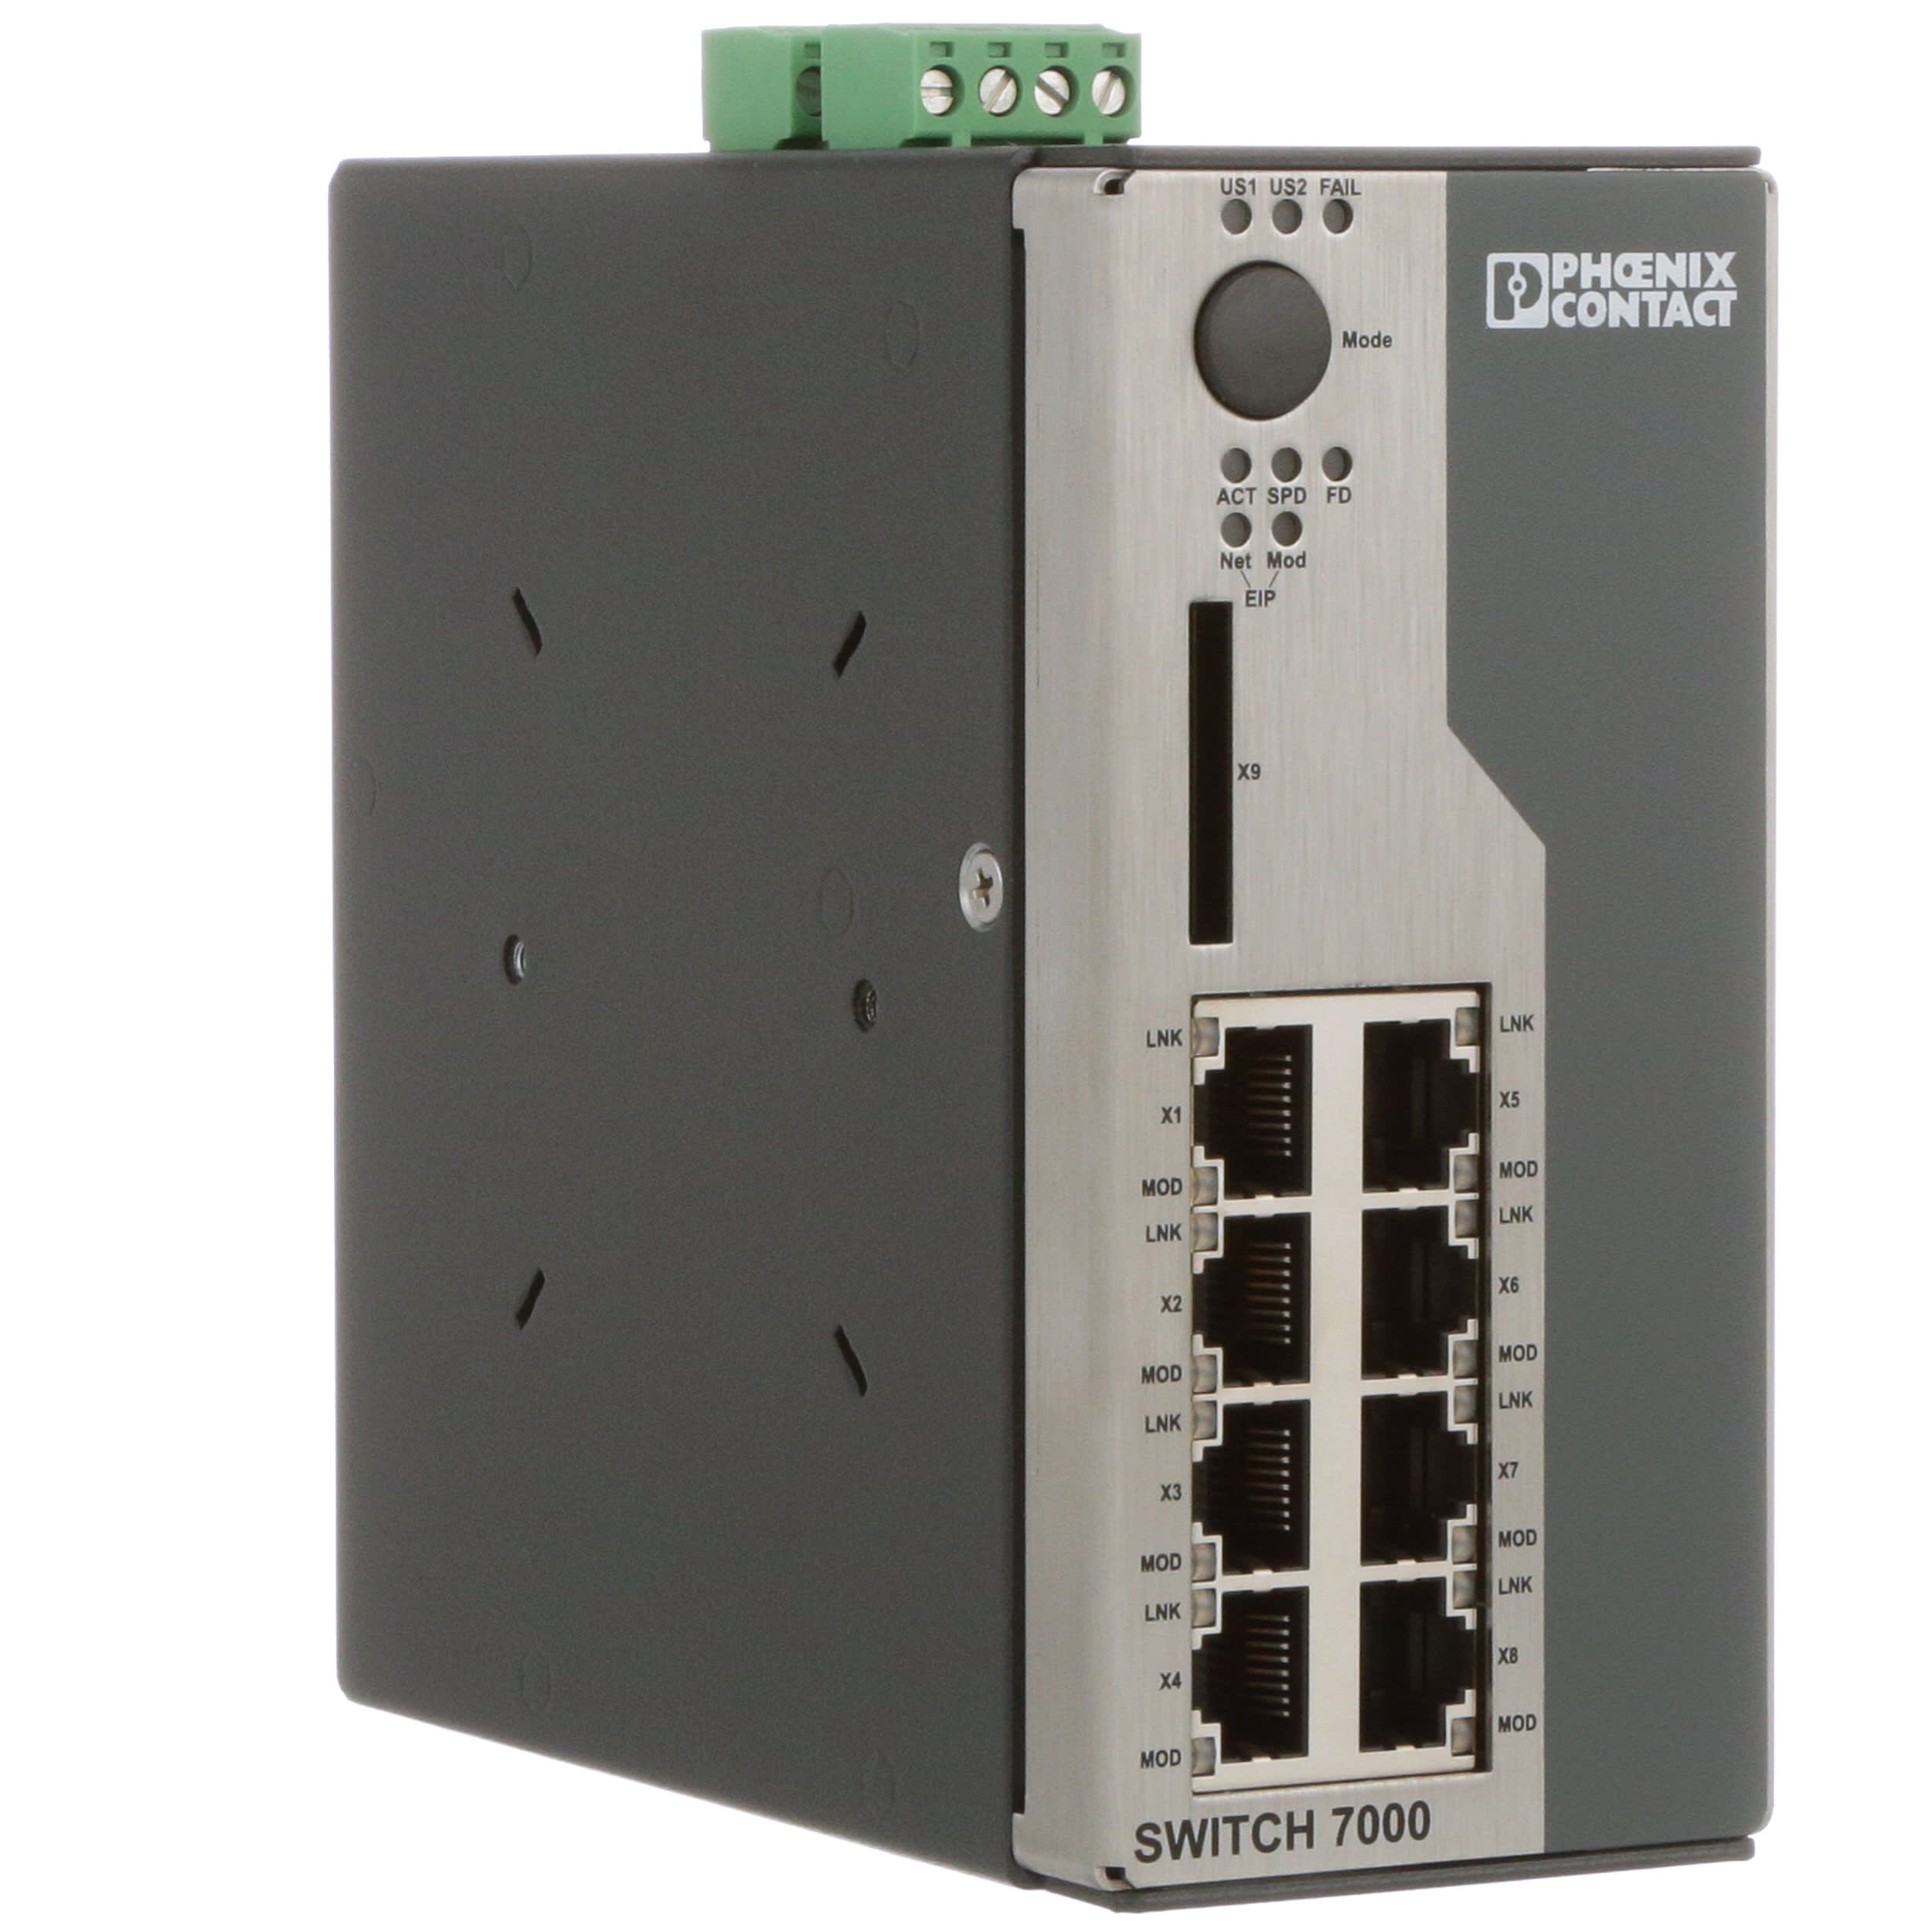 Phoenix Contact - 2701418 - Industrial Ethernet Switch, Managed, 8 Port, FL  Switch 7000 Series - RS